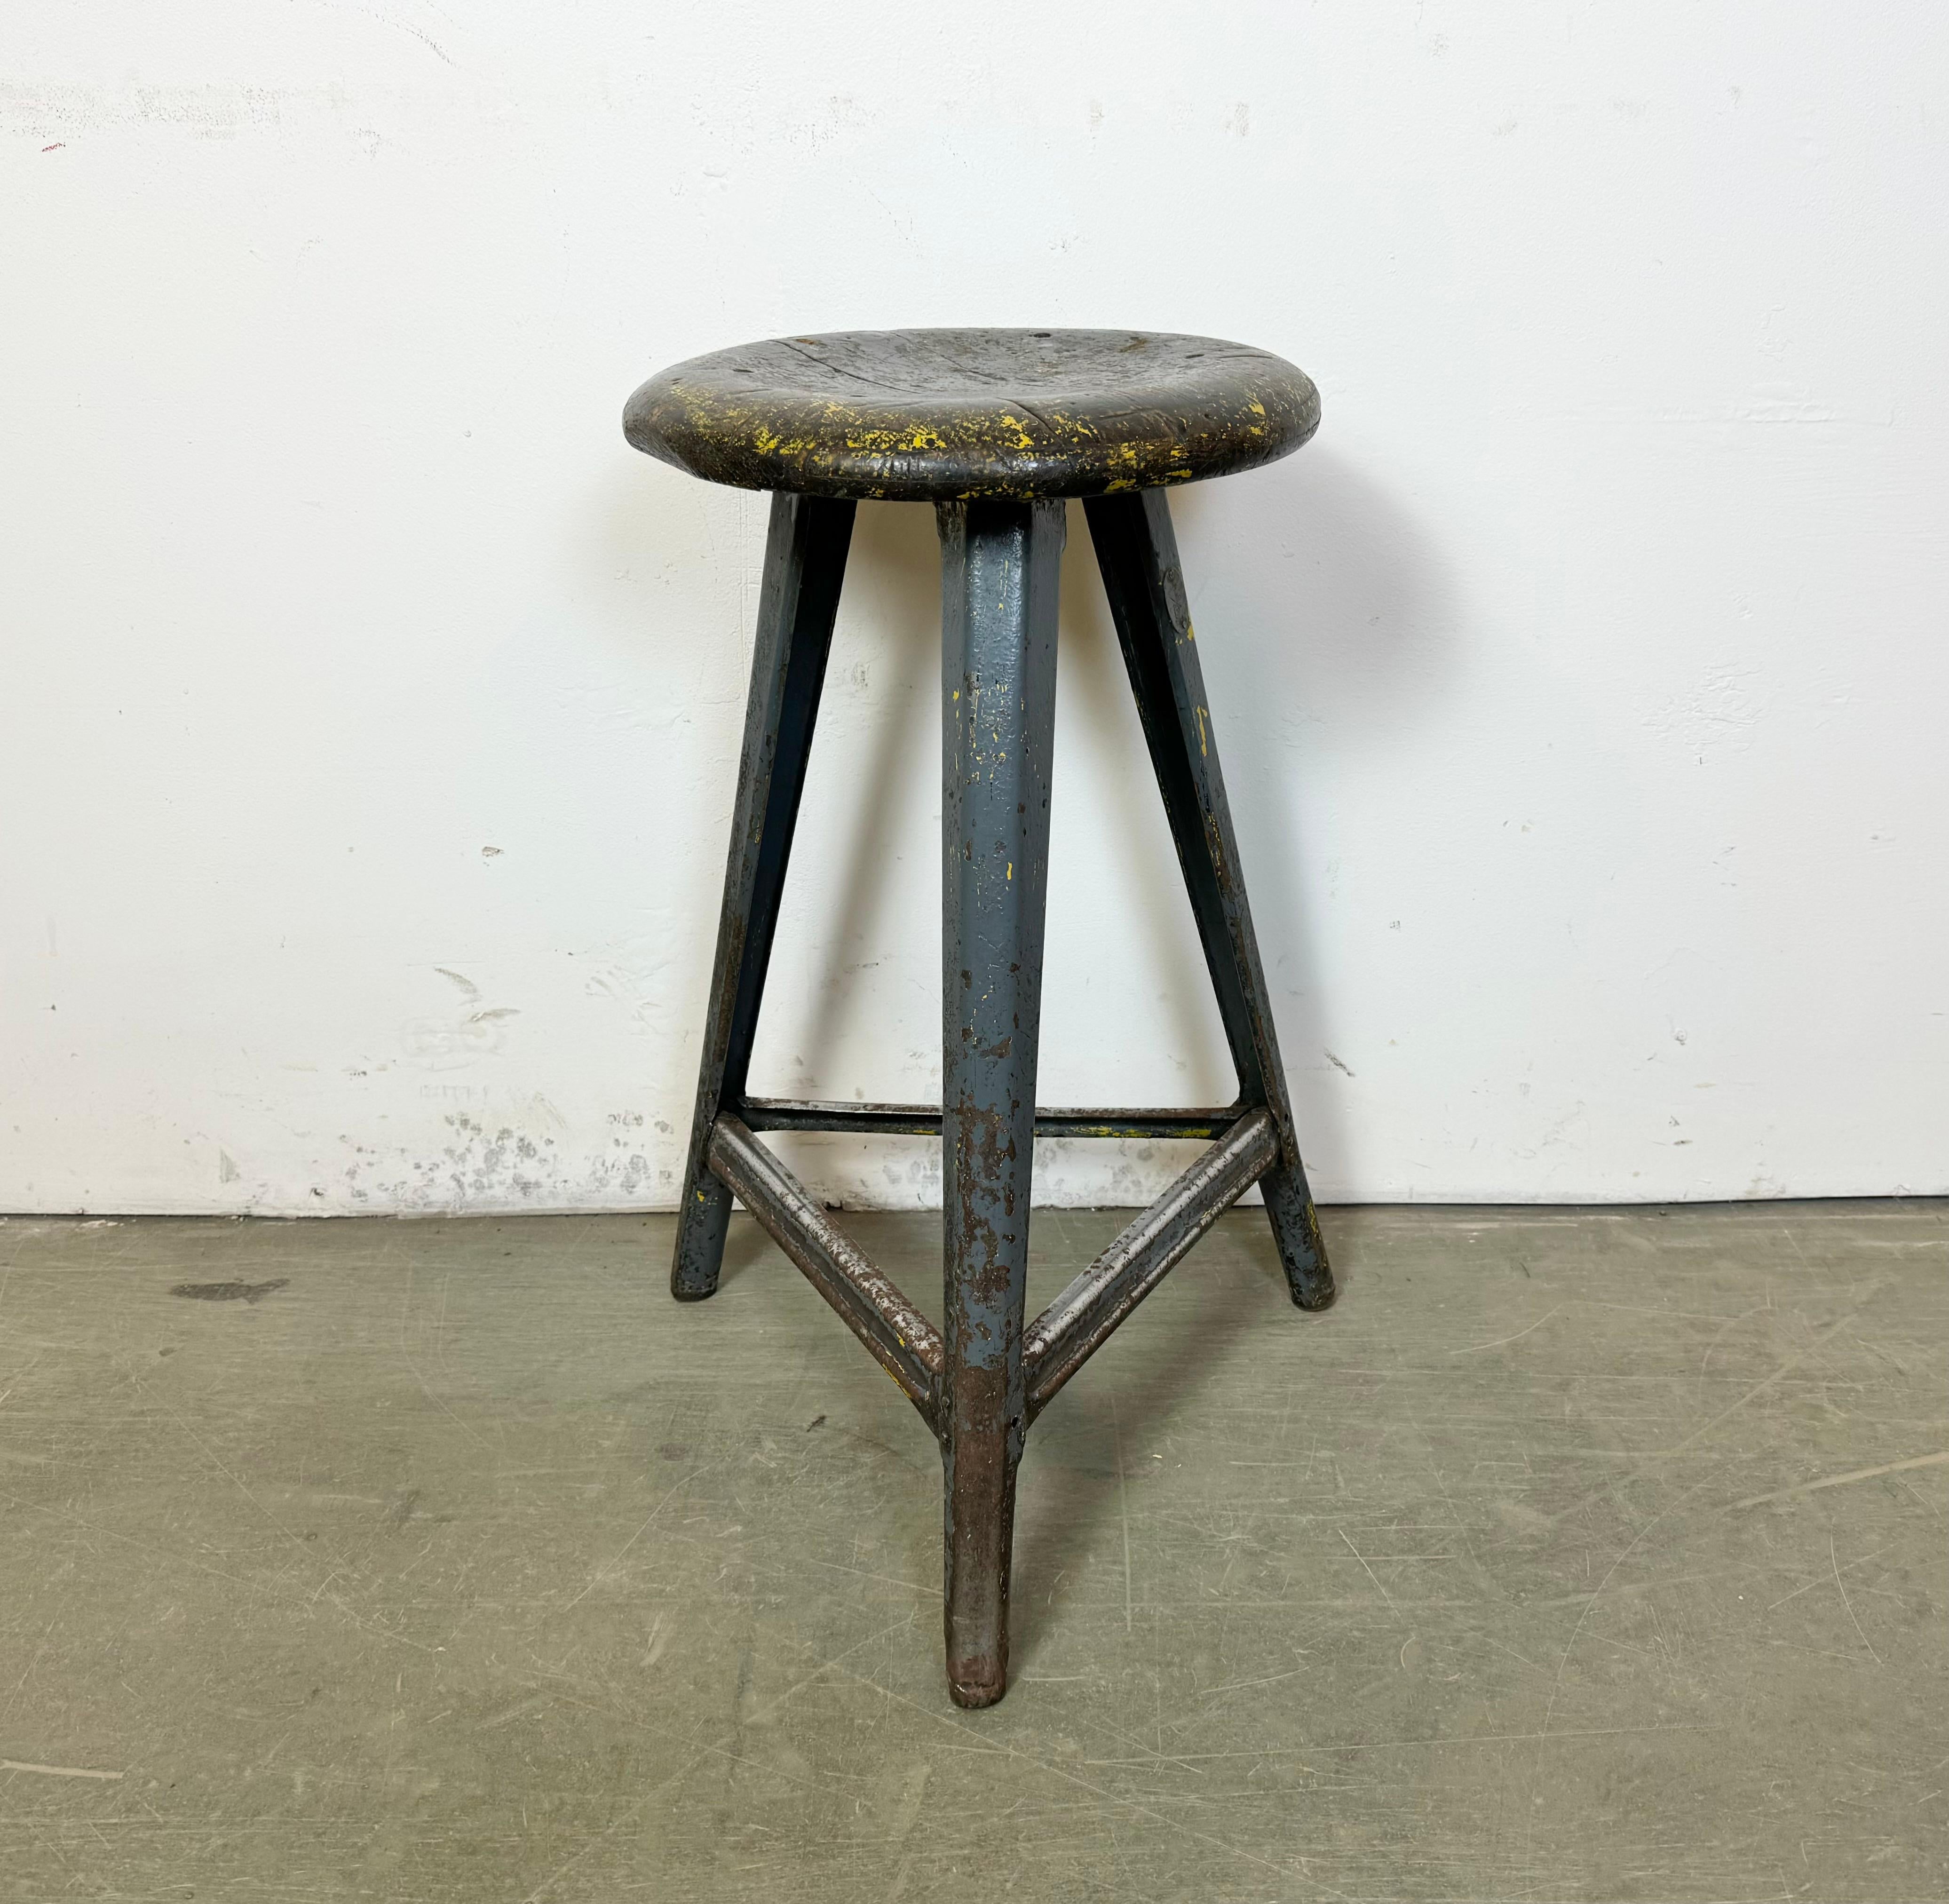 Vintage Industrial factory stool made in former Czechoslovakia during the 1960s It features a wooden seat and a grey metal frame. The weight of the stool is 6 kg.